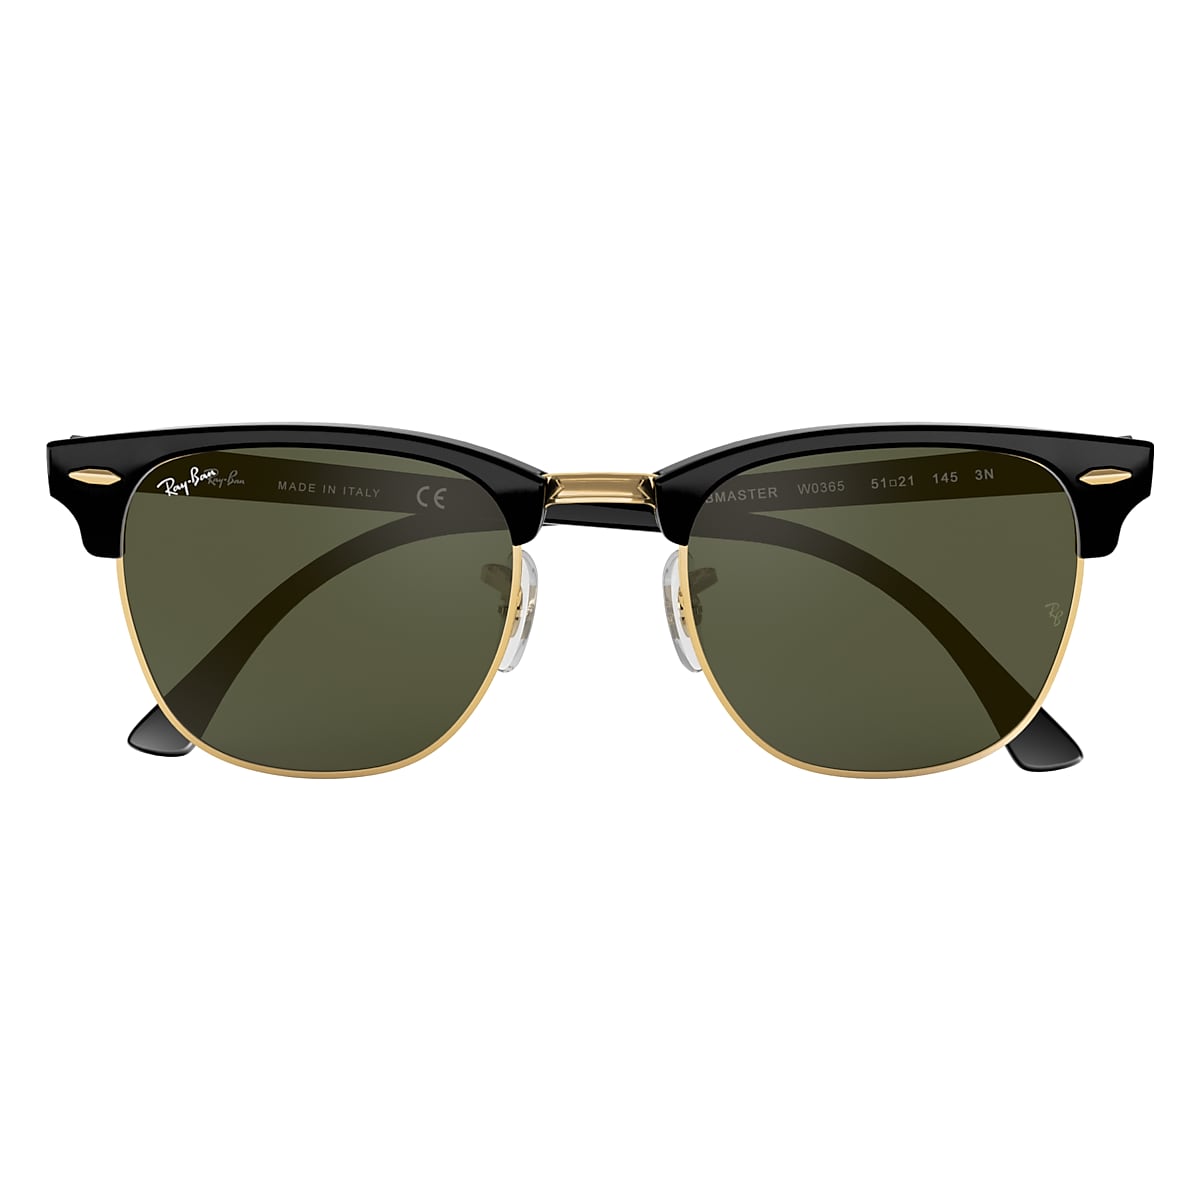 Clubmaster Sunglasses in Black and Green |